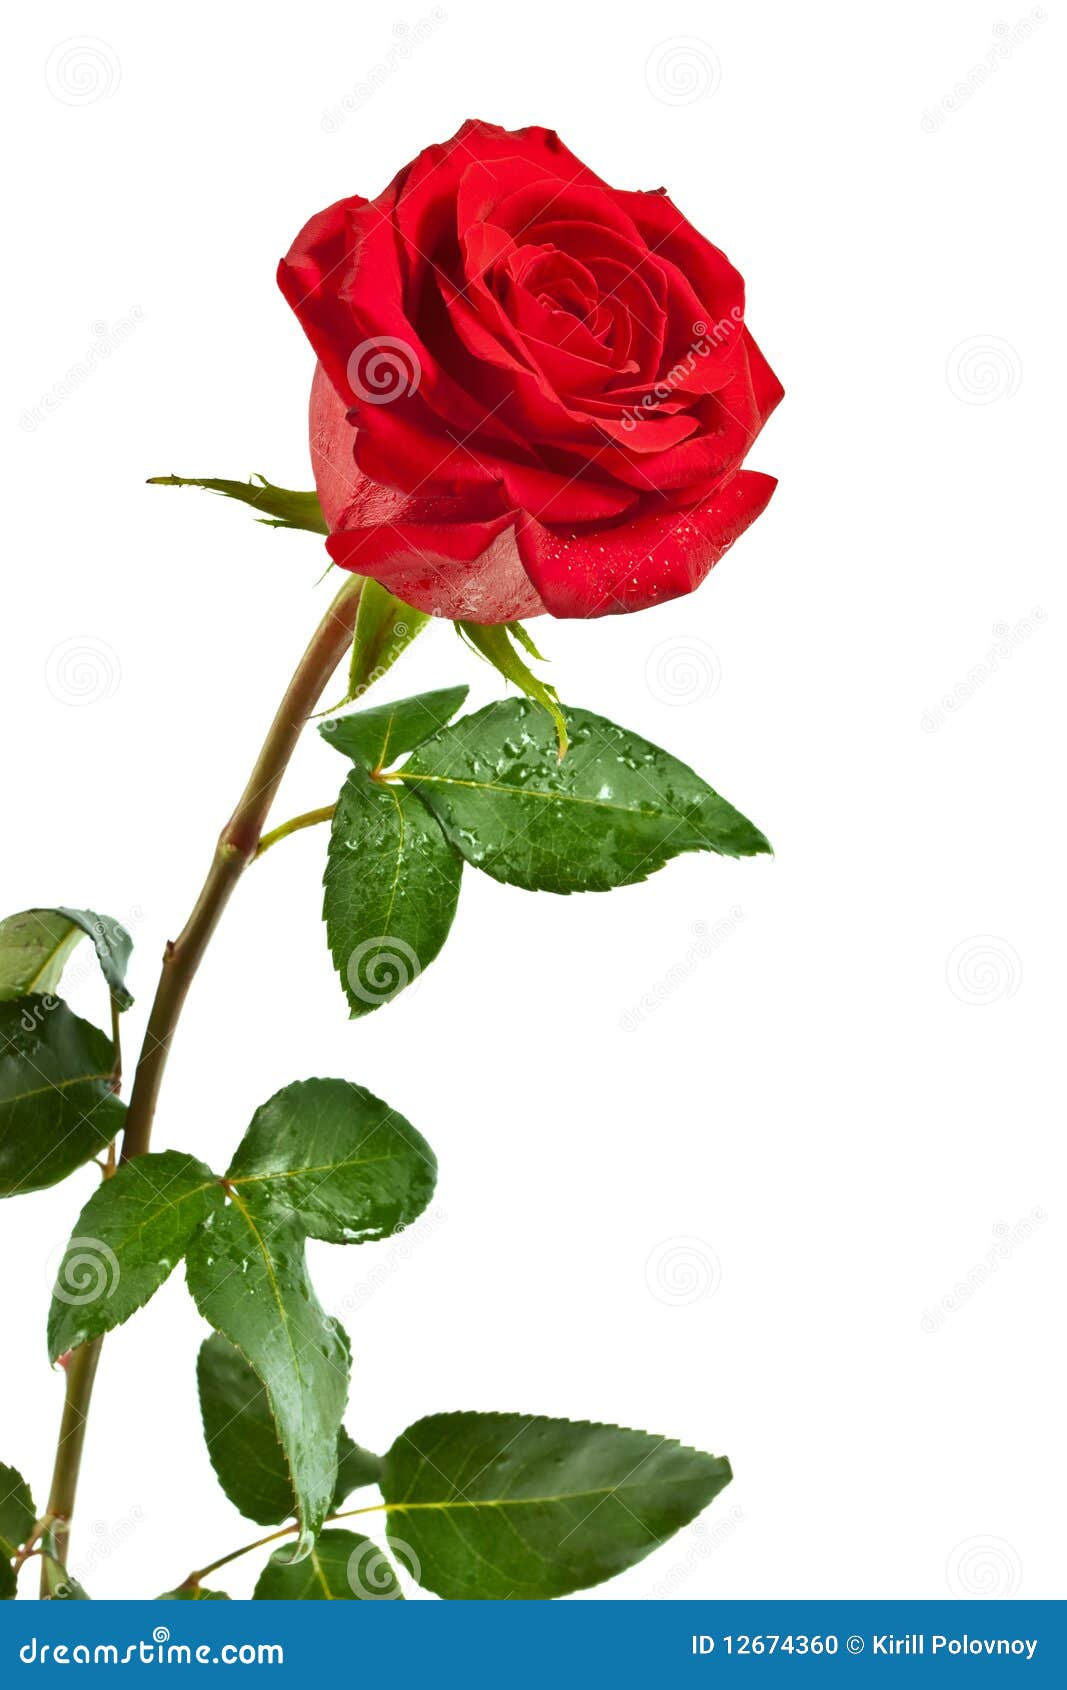 Red rose isolated stock photo. Image of bouquet, leaf